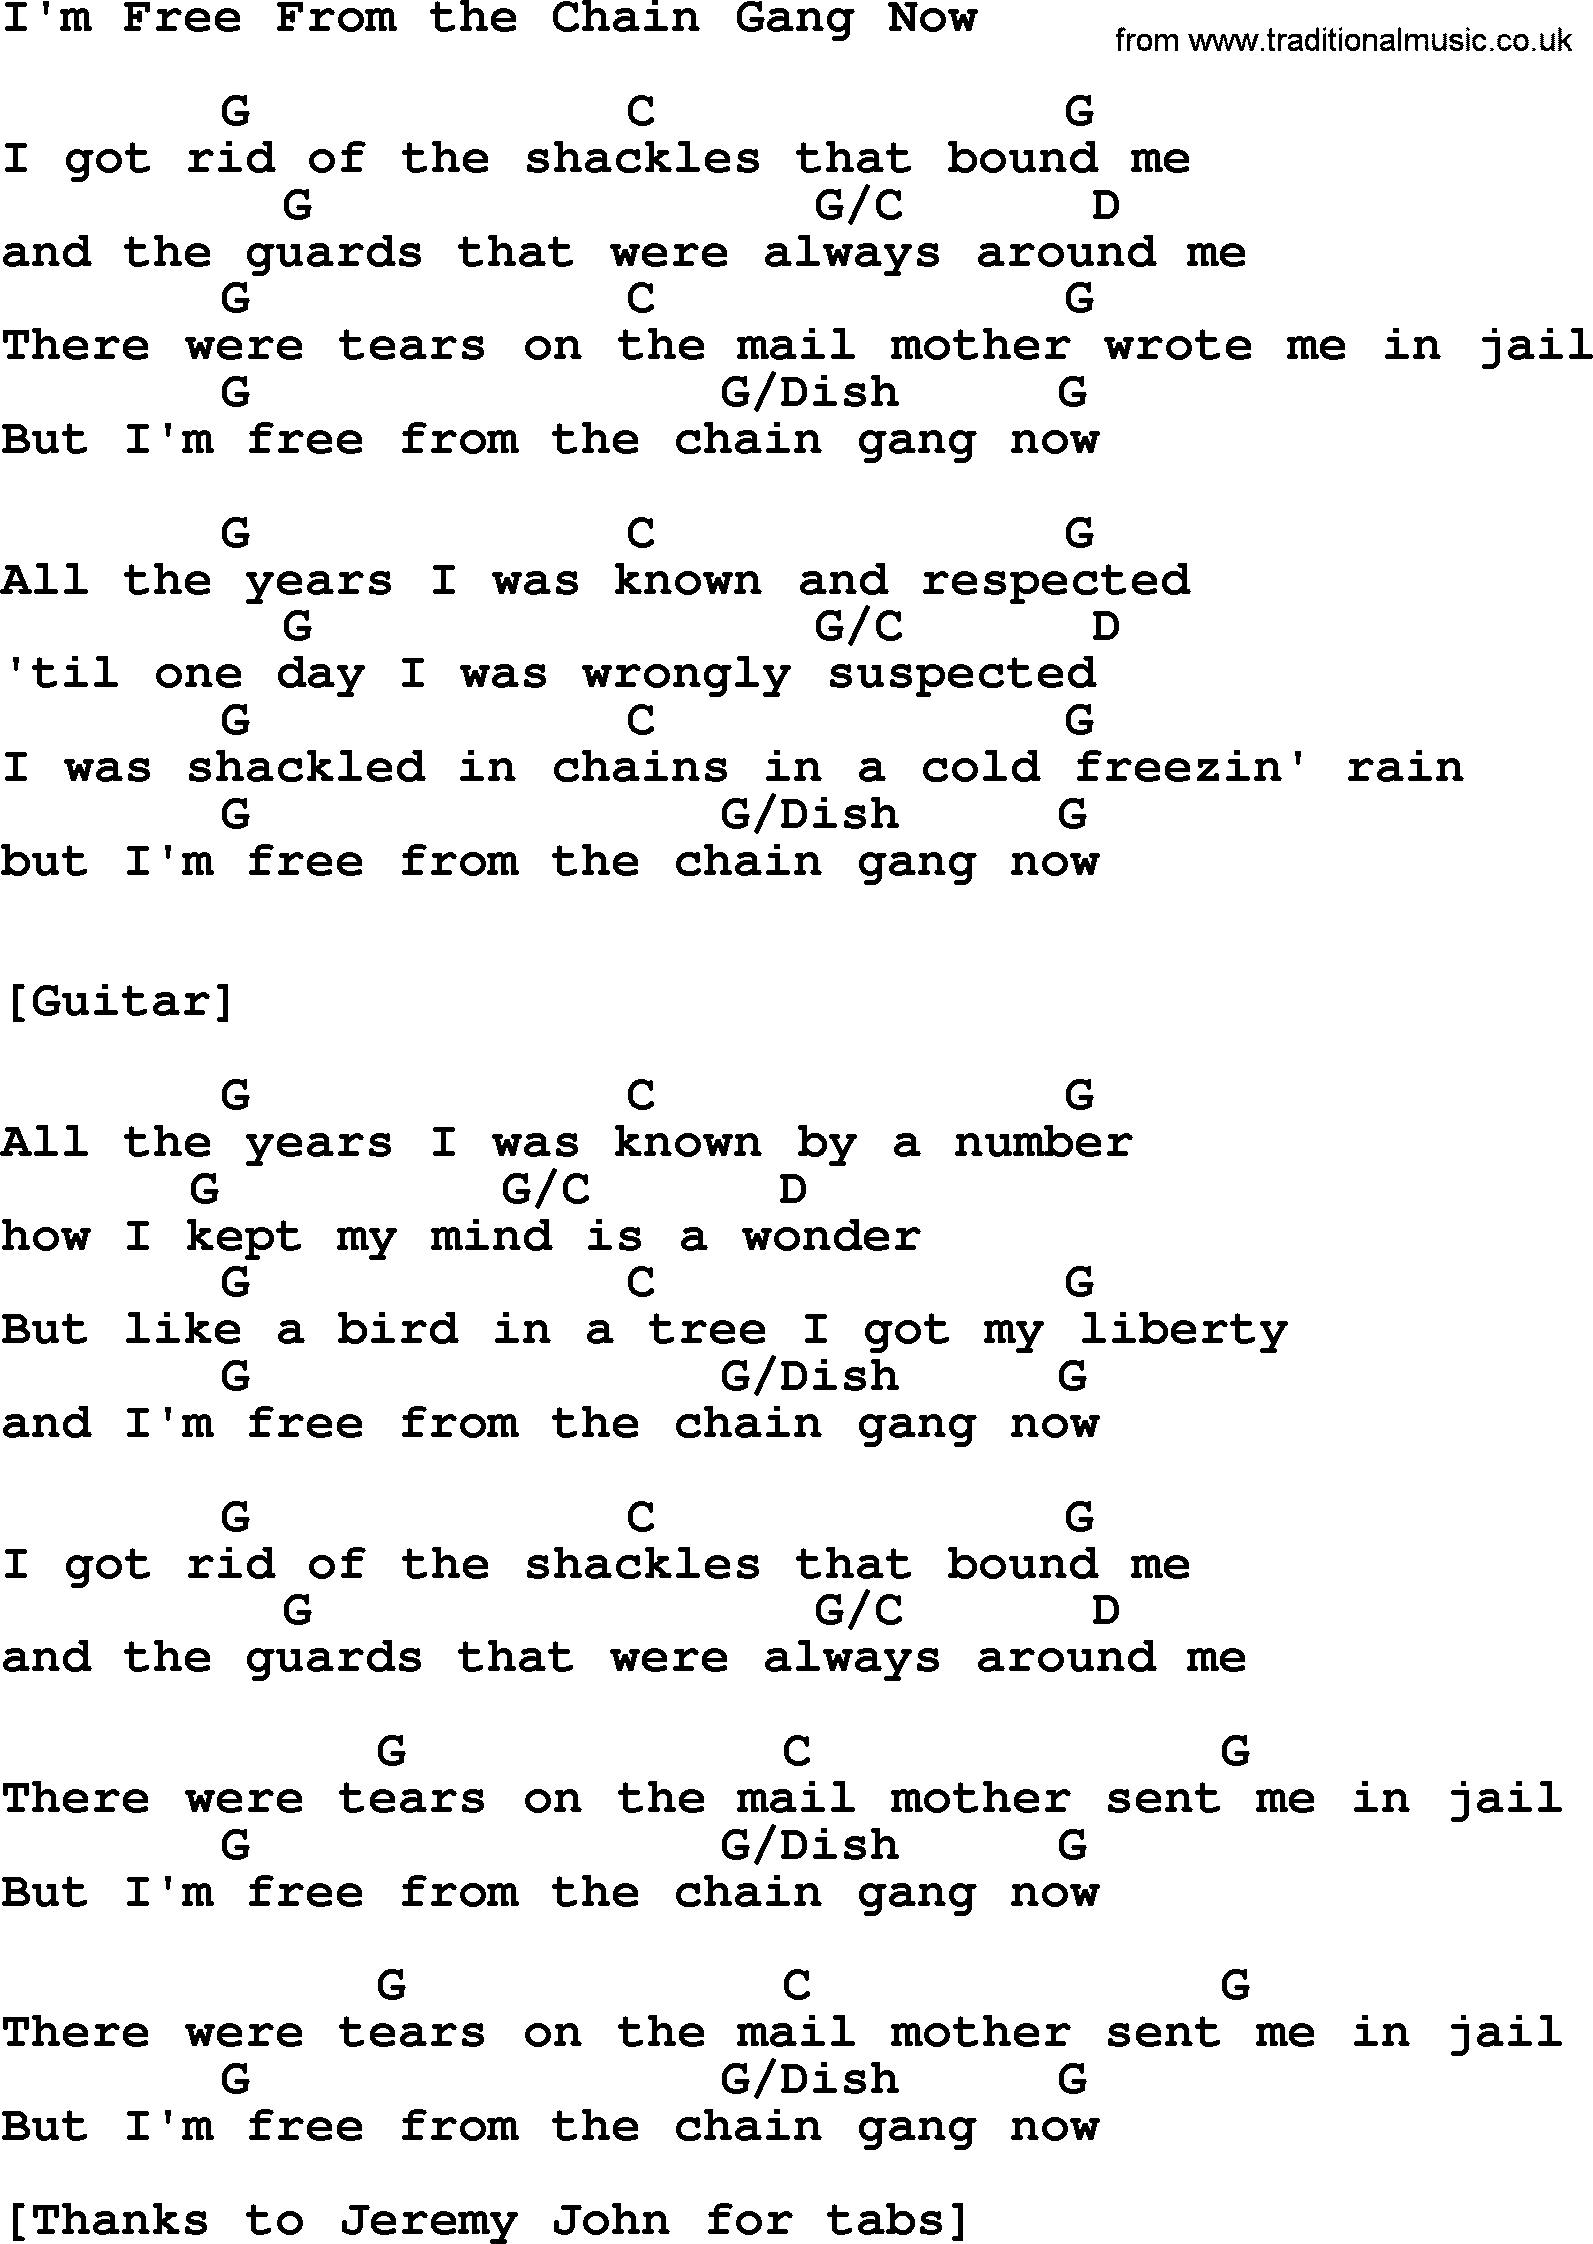 Johnny Cash song I'm Free From The Chain Gang Now, lyrics and chords